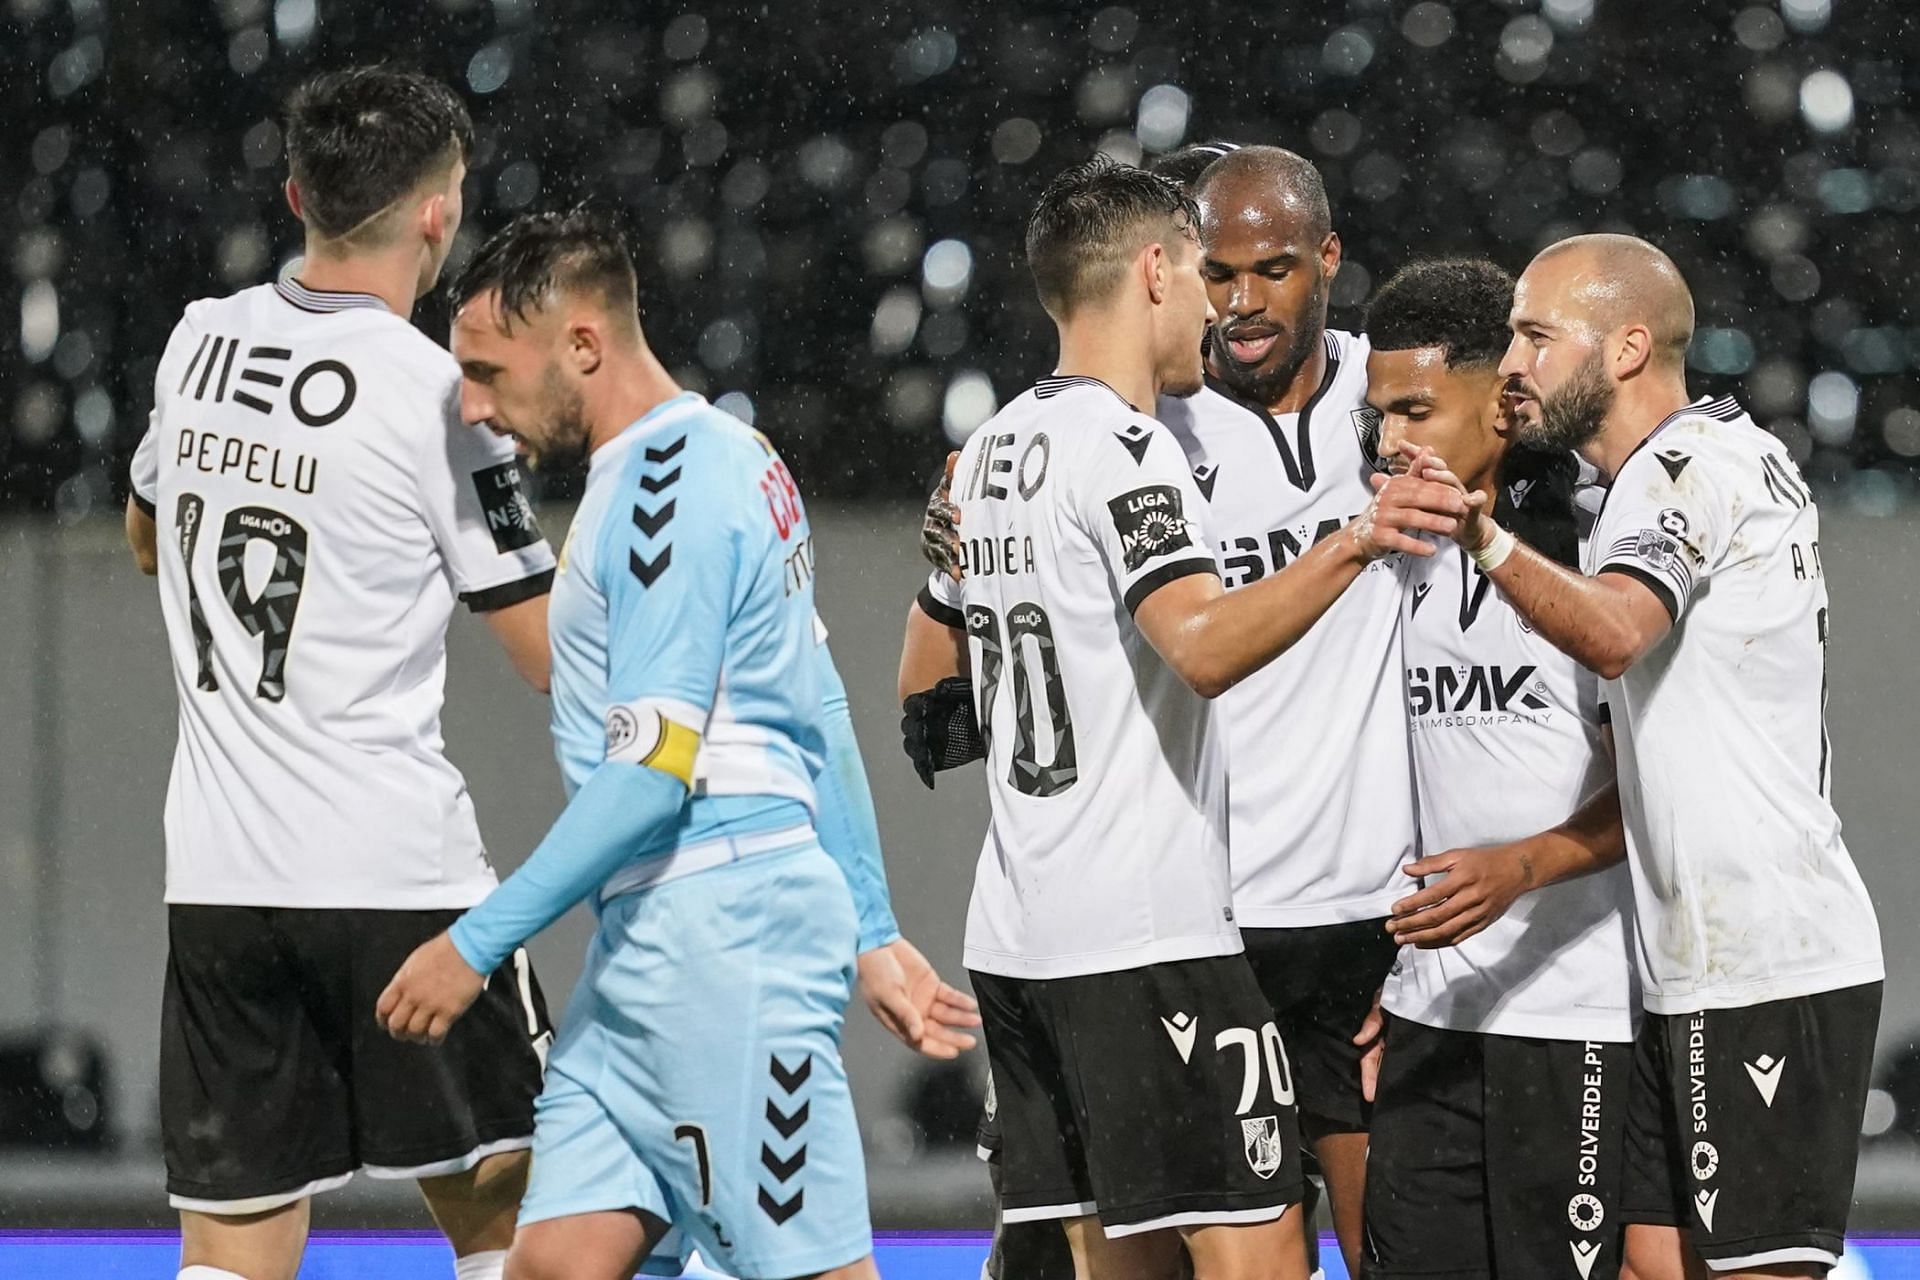 Vitoria Guimaraes face an easy task against Puskas in their Conference League qualifier on Thursday